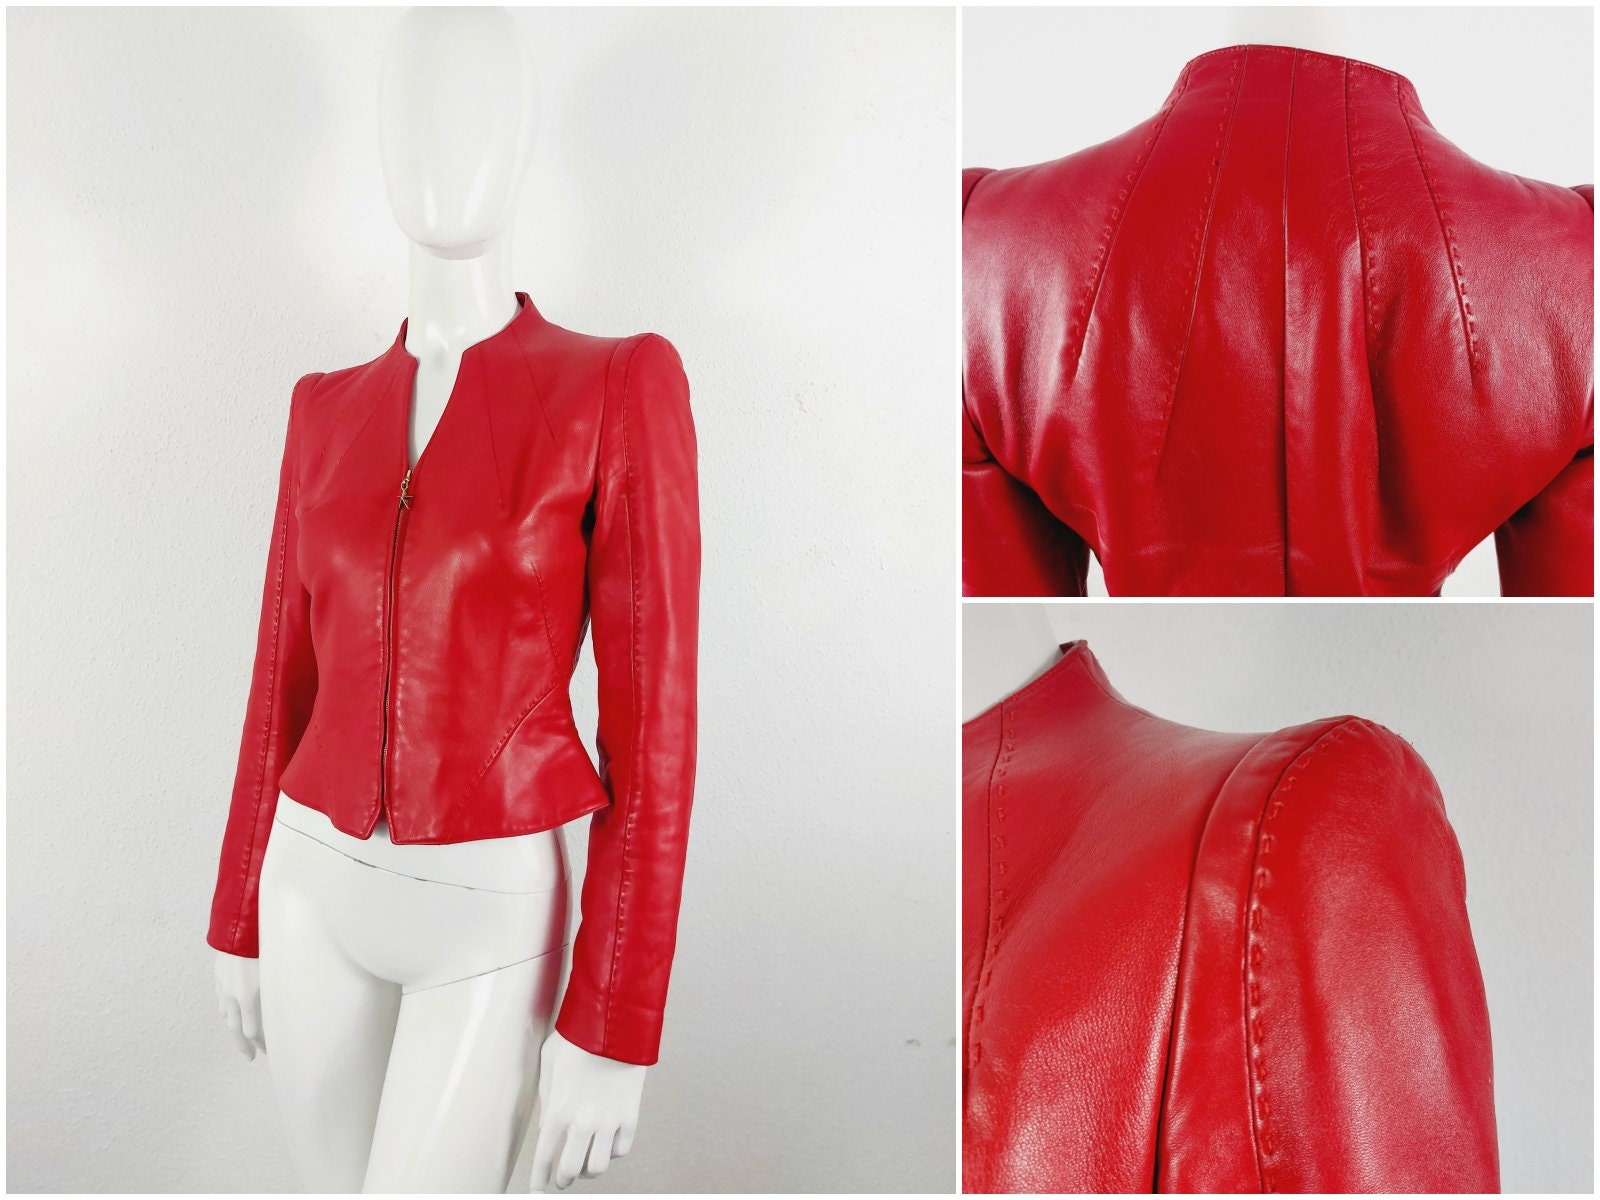 THIERRY MUGLER Vintage Blazer, 90s Red Suit Jacket, French Fashion